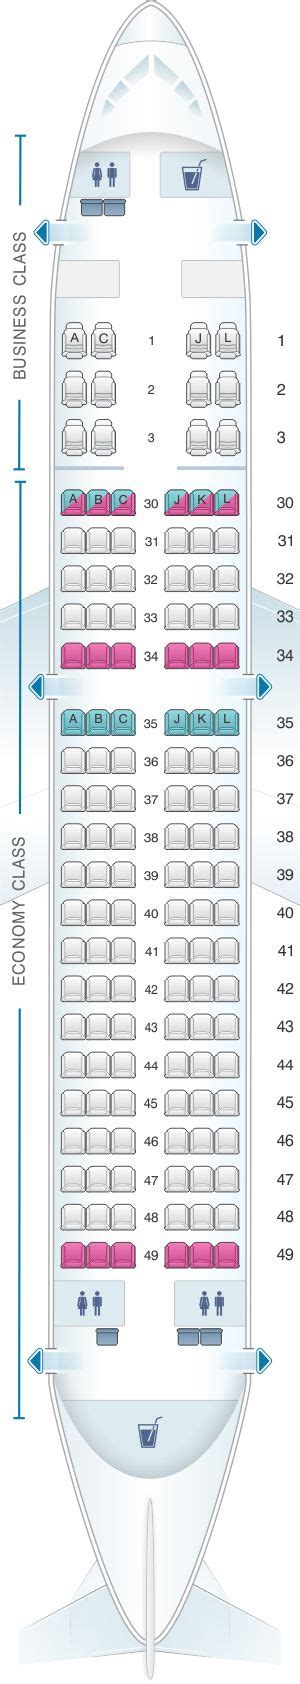 Seat Map Saudi Arabian Airlines Airbus A320 200 Standard With Images